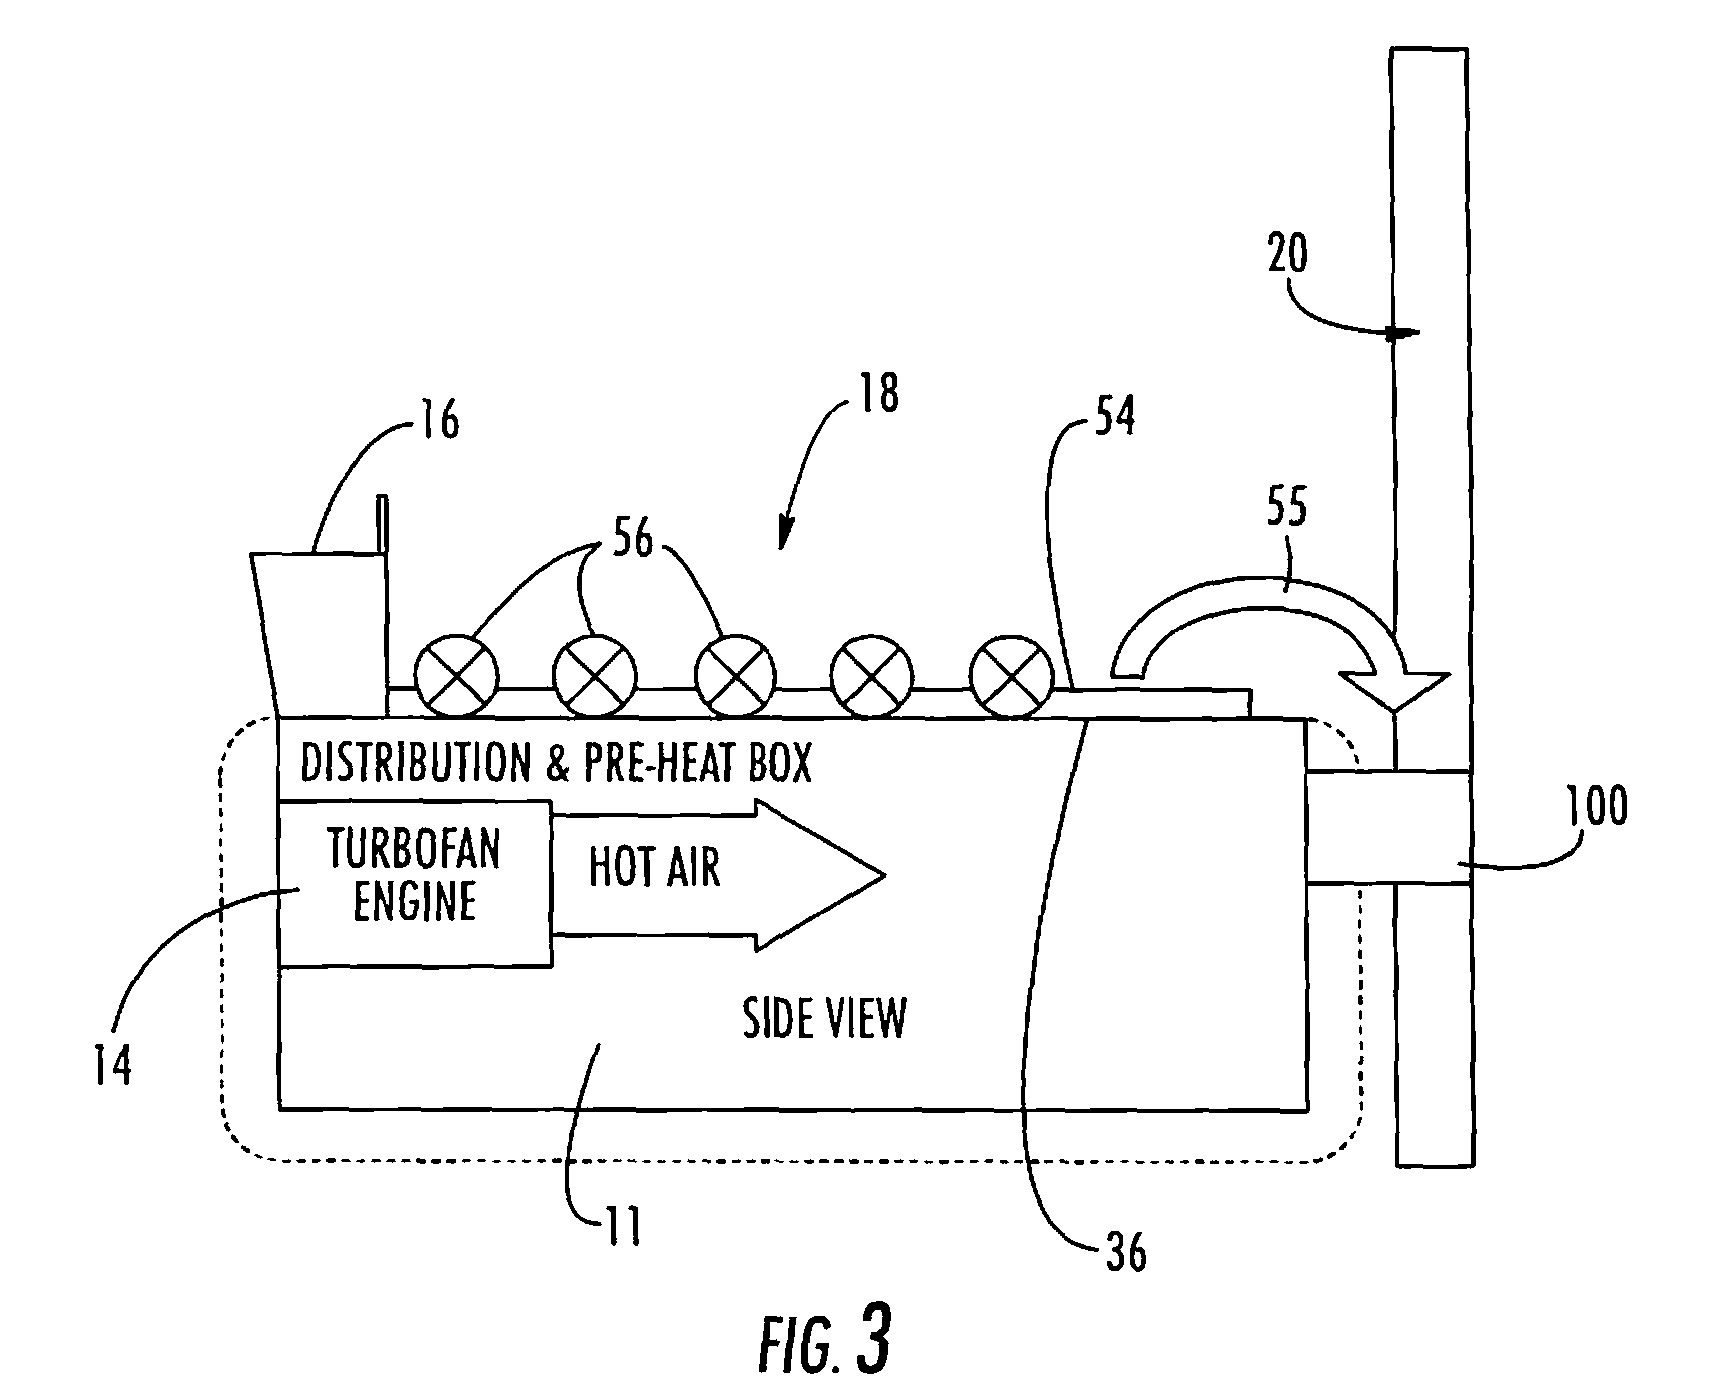 System and method employing turbofan jet engine for drying bulk materials